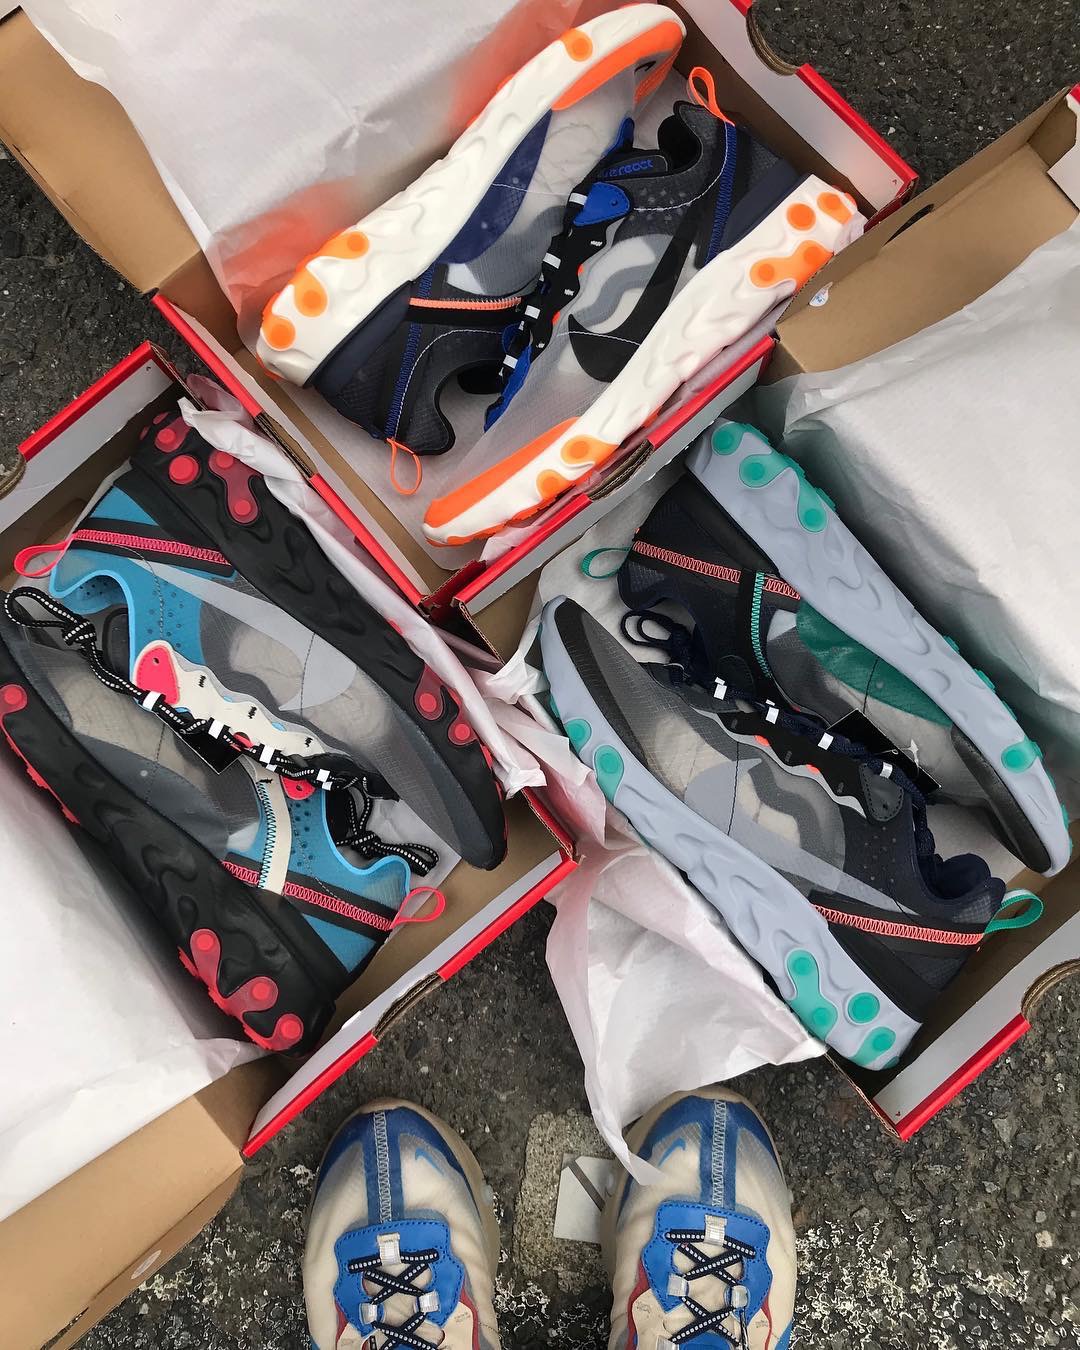 NIKE】10月11日（木）発売予定 REACT ELEMENT 87 新色3カラー | UP TO DATE